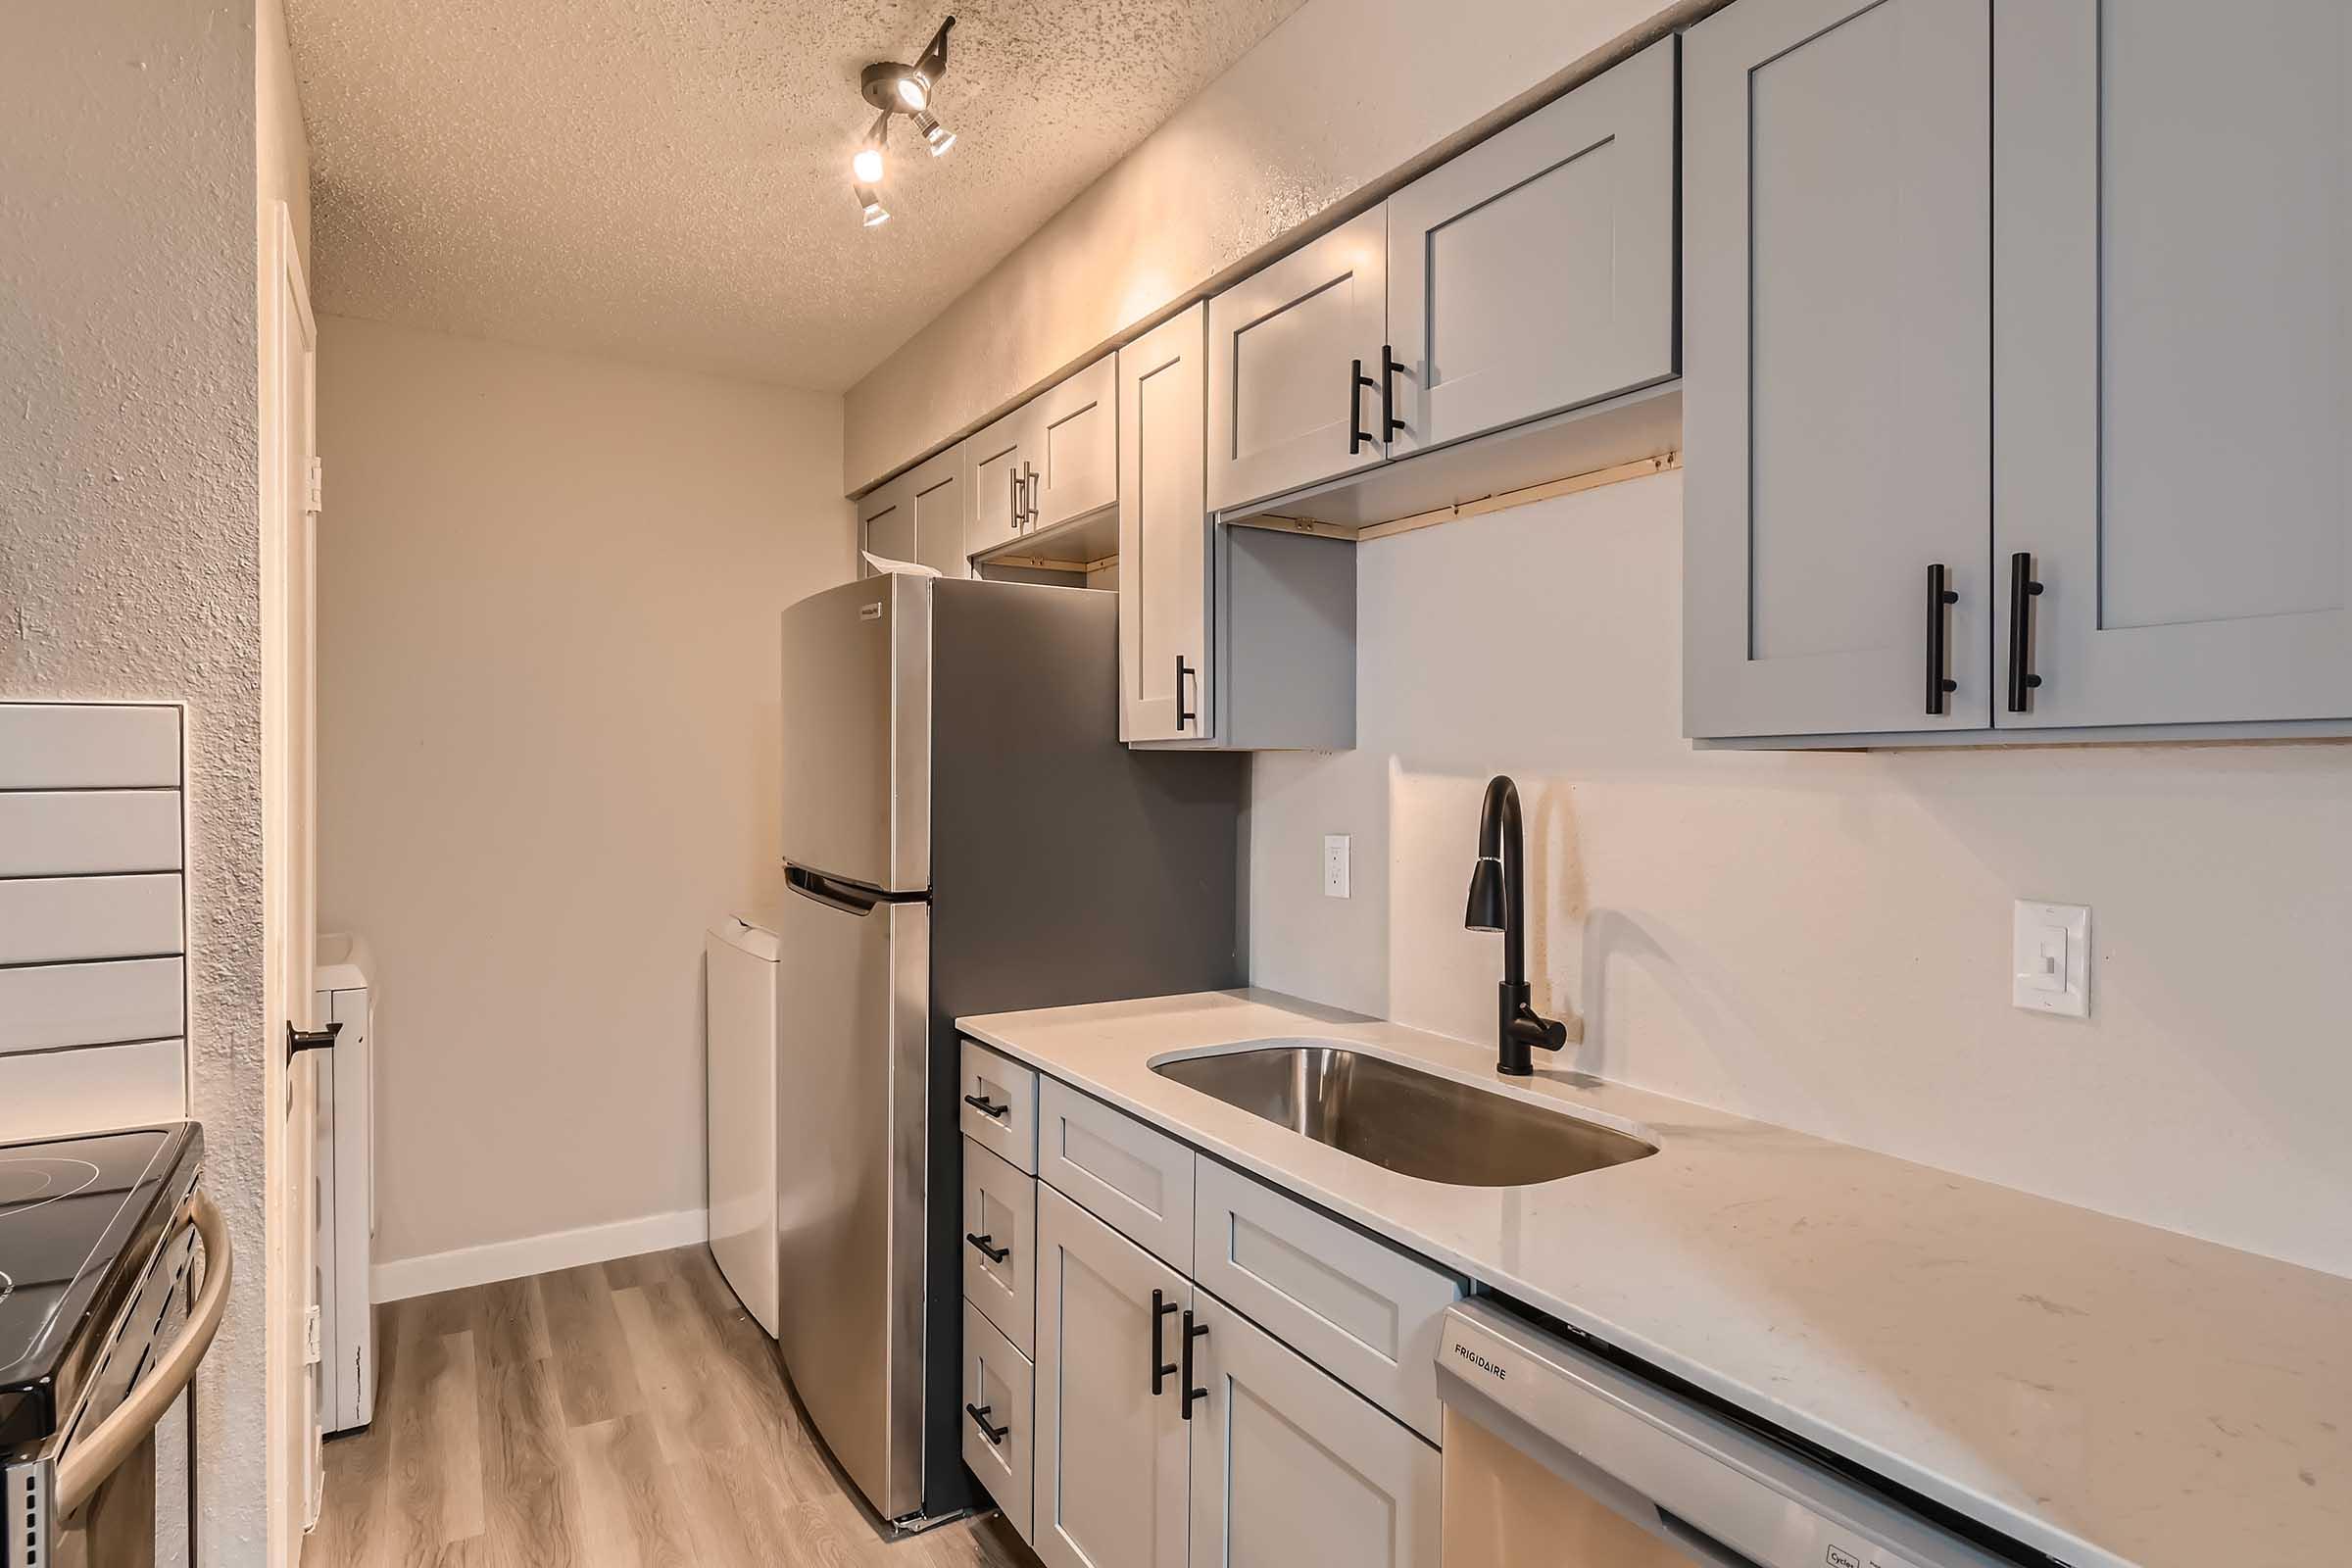 An apartment kitchen with stainless steel appliances, a washer and dryer, and shaker cabinets at Rise North Arlington.